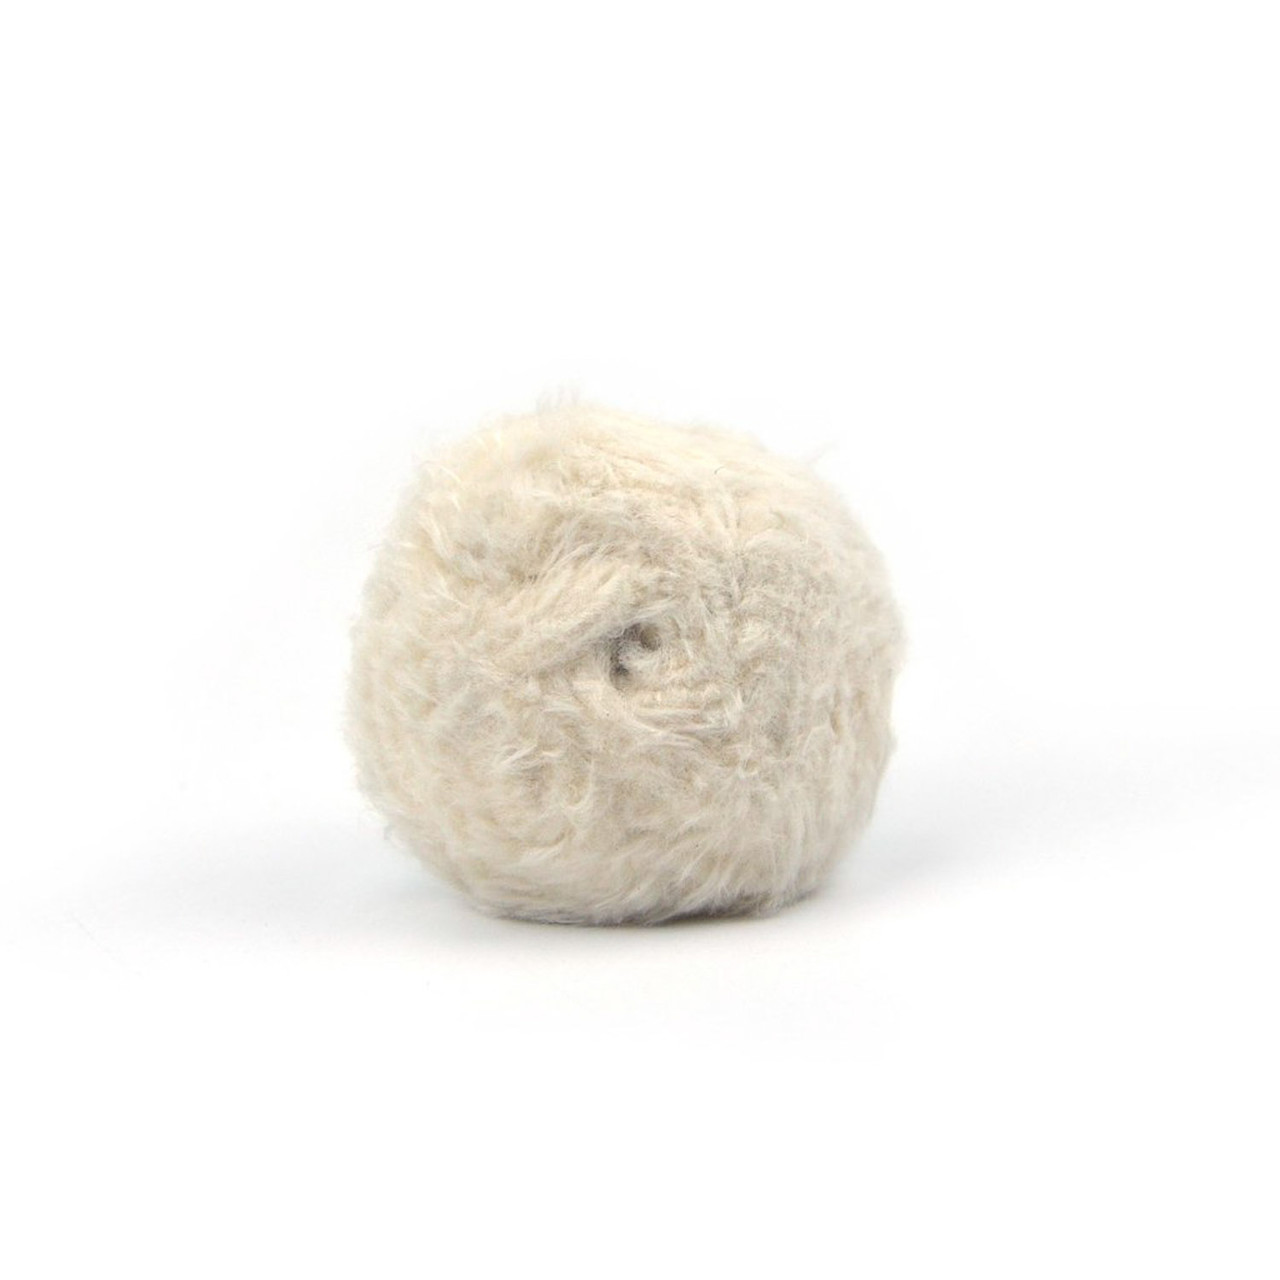 Hurricane, Small Mushroom shaped Cotton Buffing Wheel with Mounted Shank